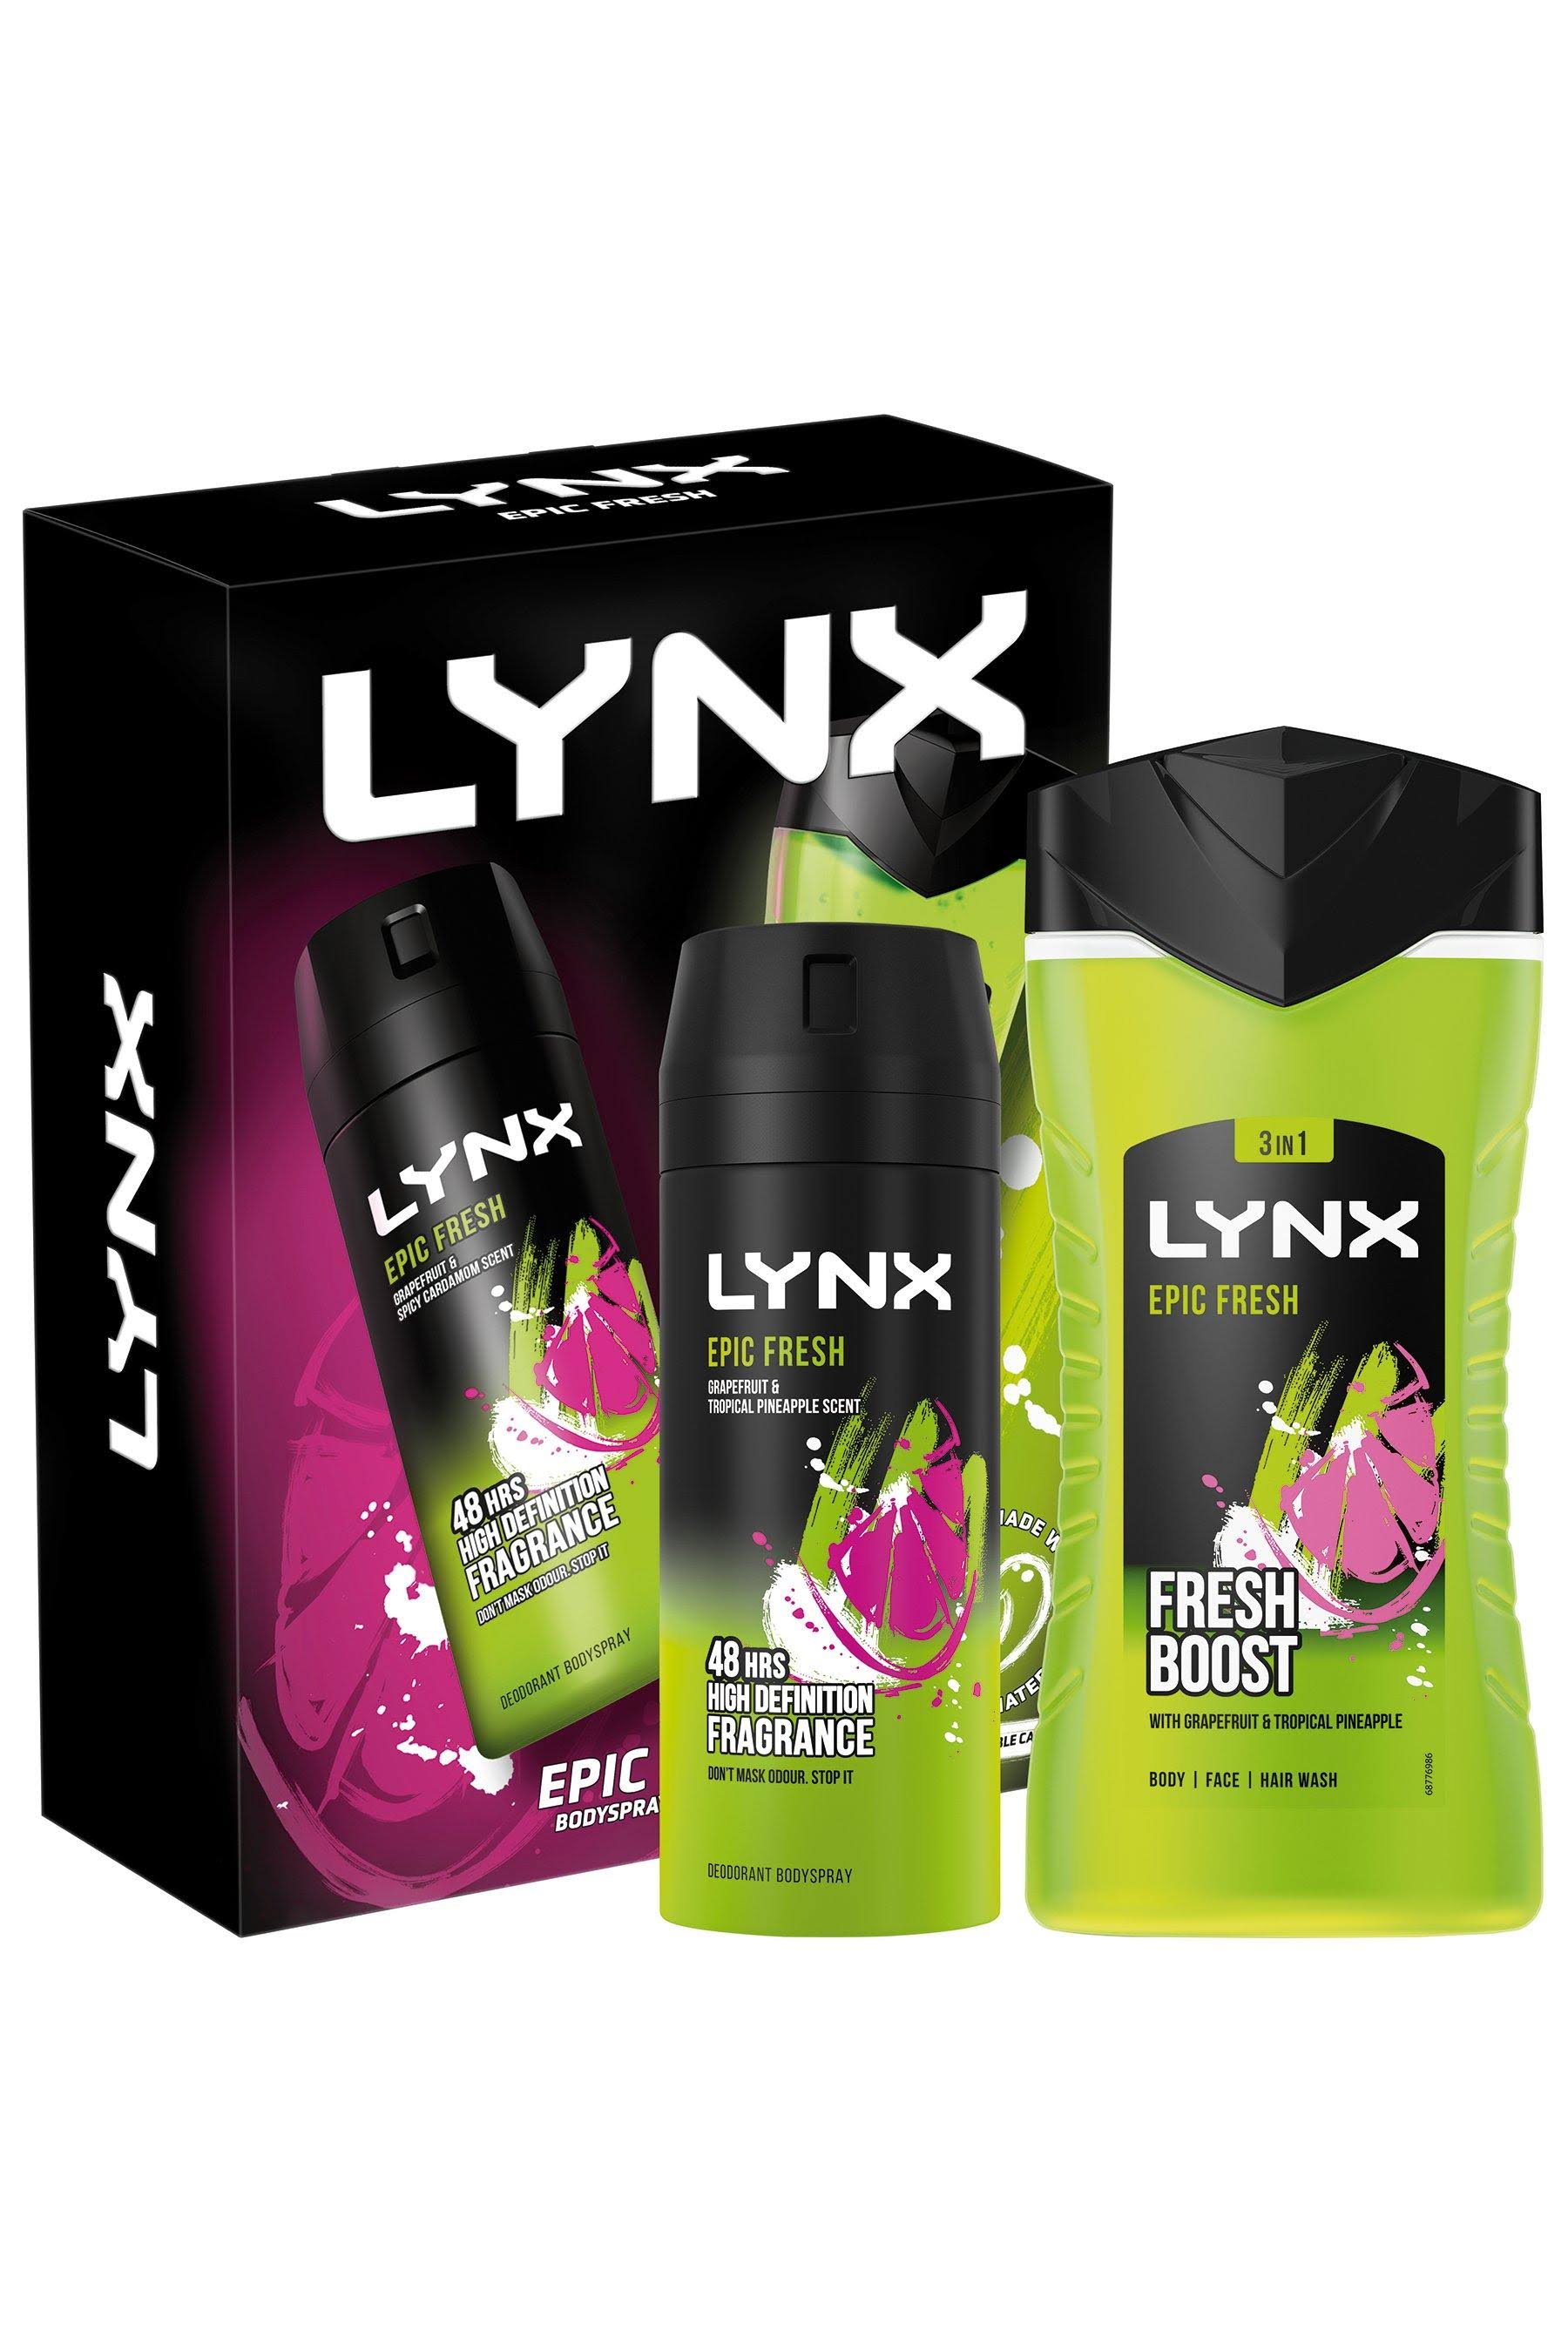 Lynx Epic Fresh Duo Gift Set 2 Piece by dpharmacy